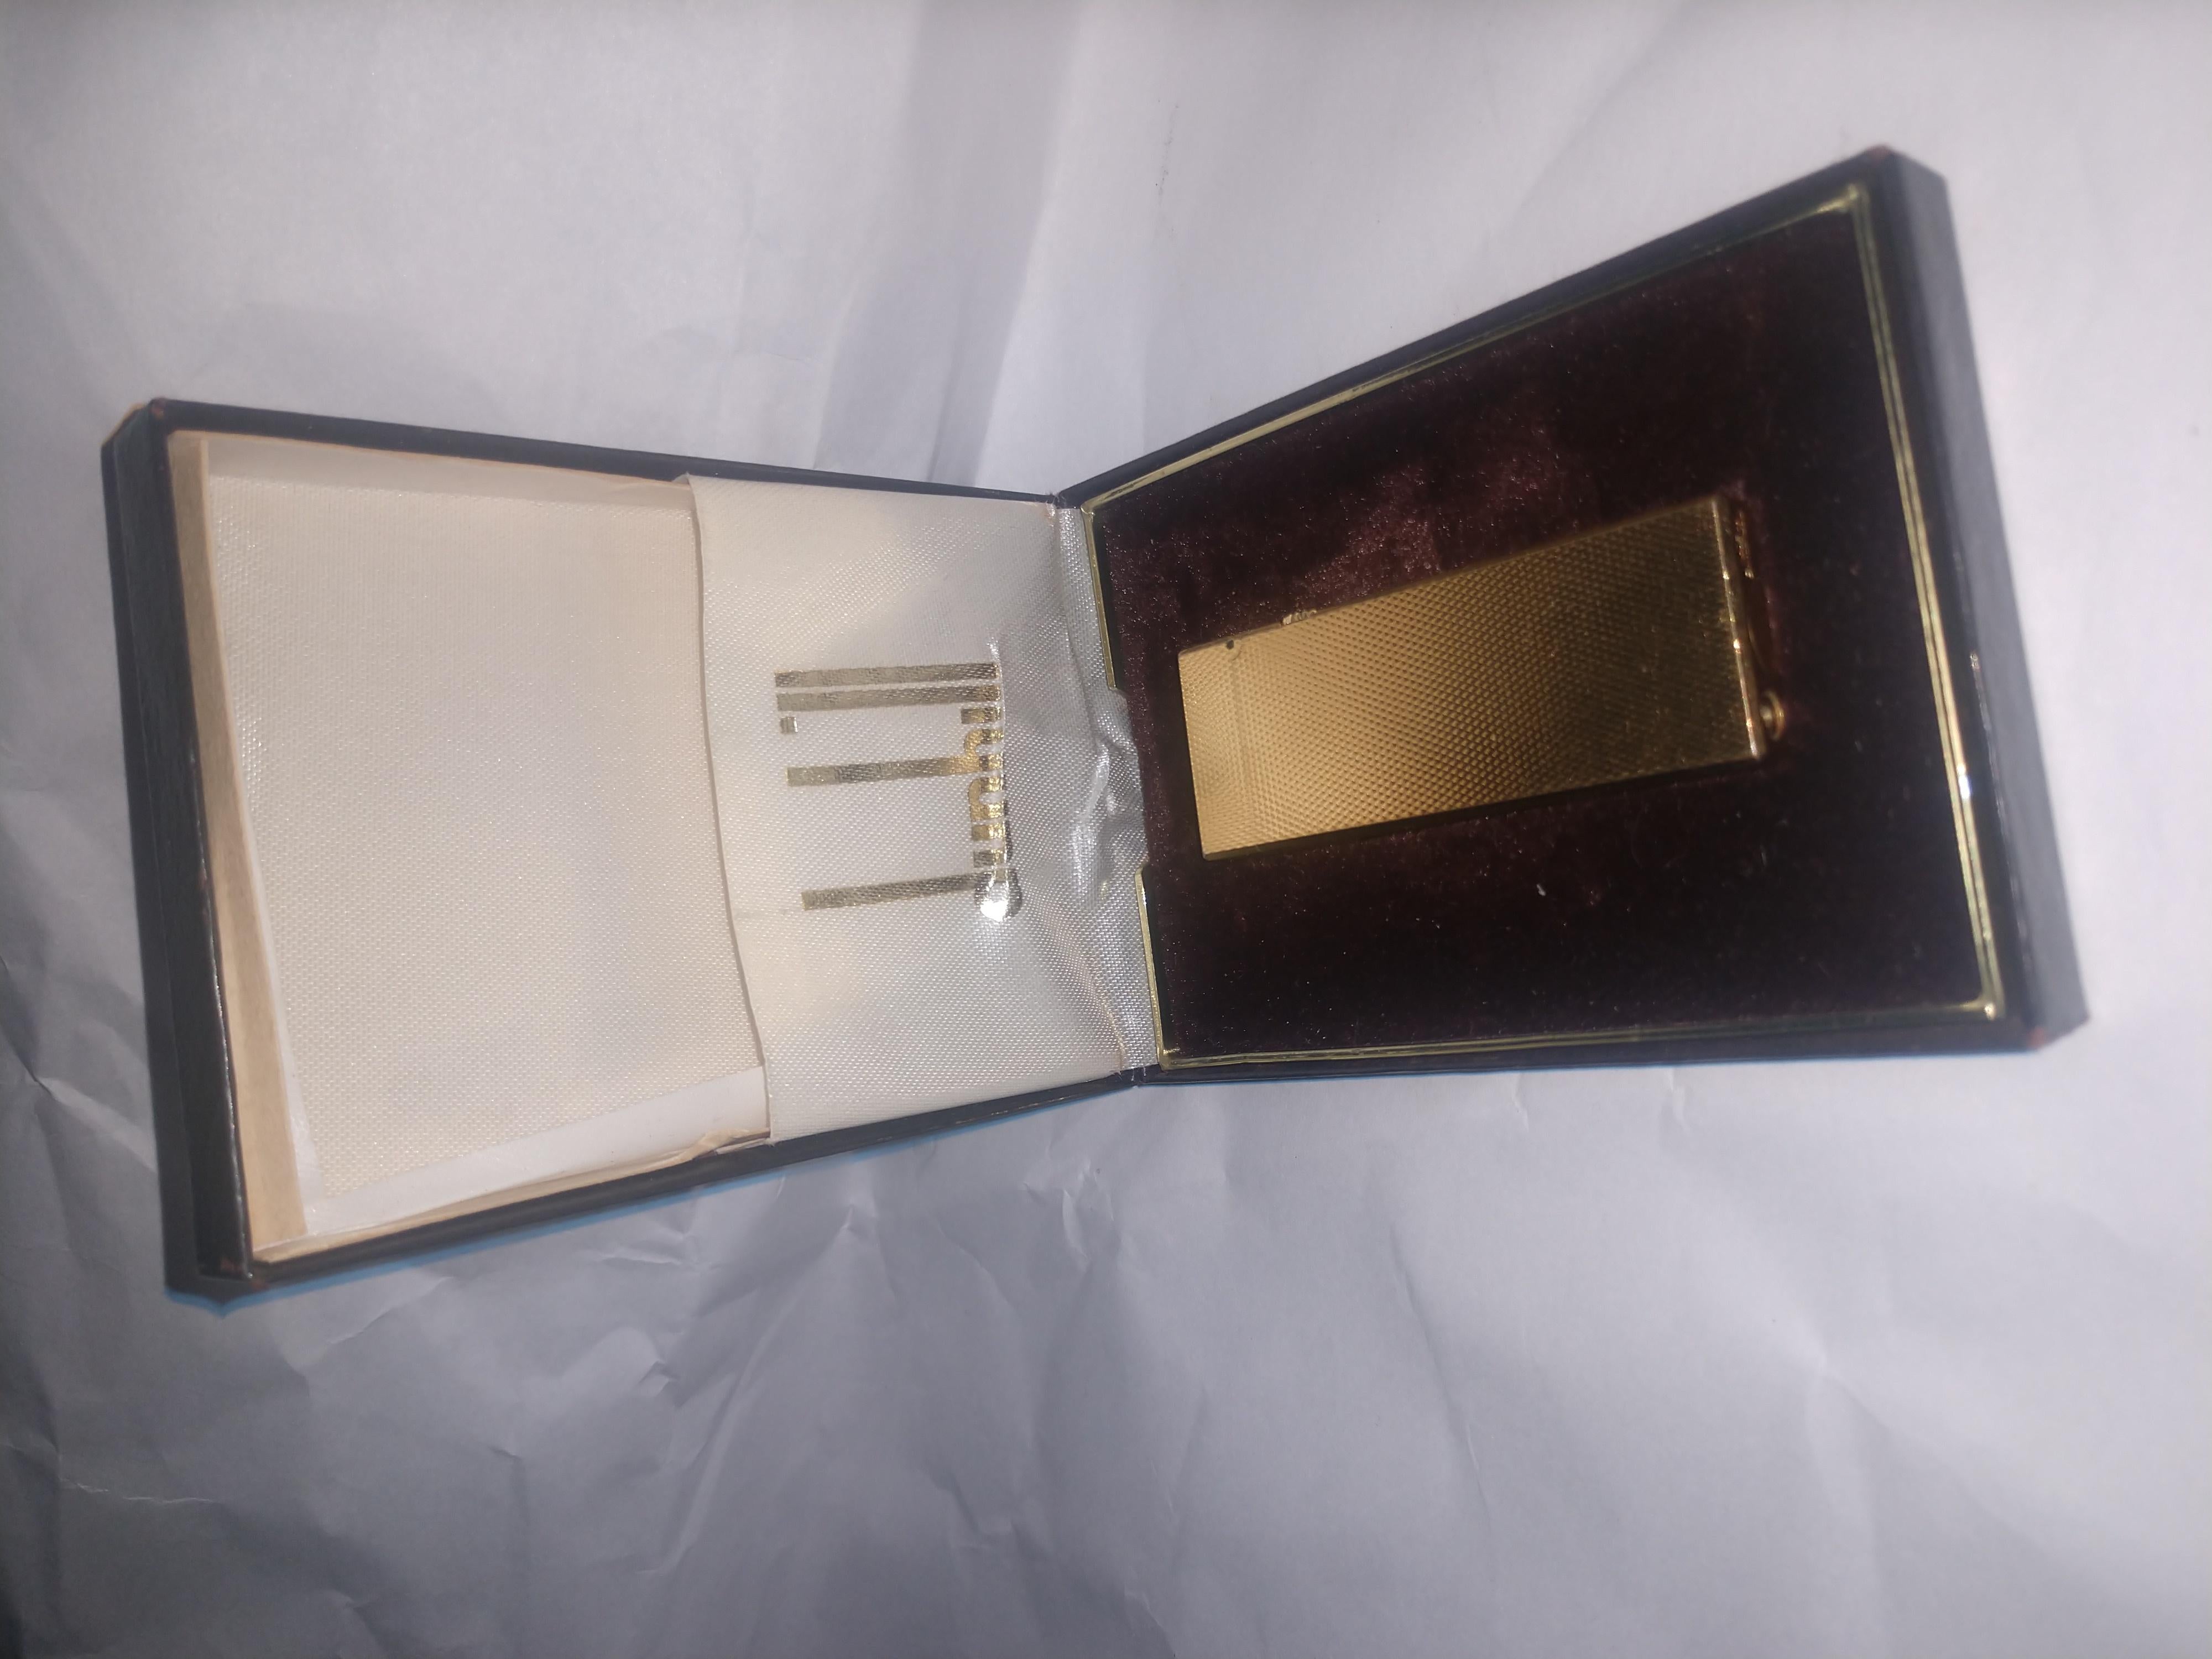 Fabulous and hardly used. Dunhill Rollagas Rulerlite butane lighter made in Switzerland. In original case with 3 booklets. Excellent vintage condition with minimal wear.